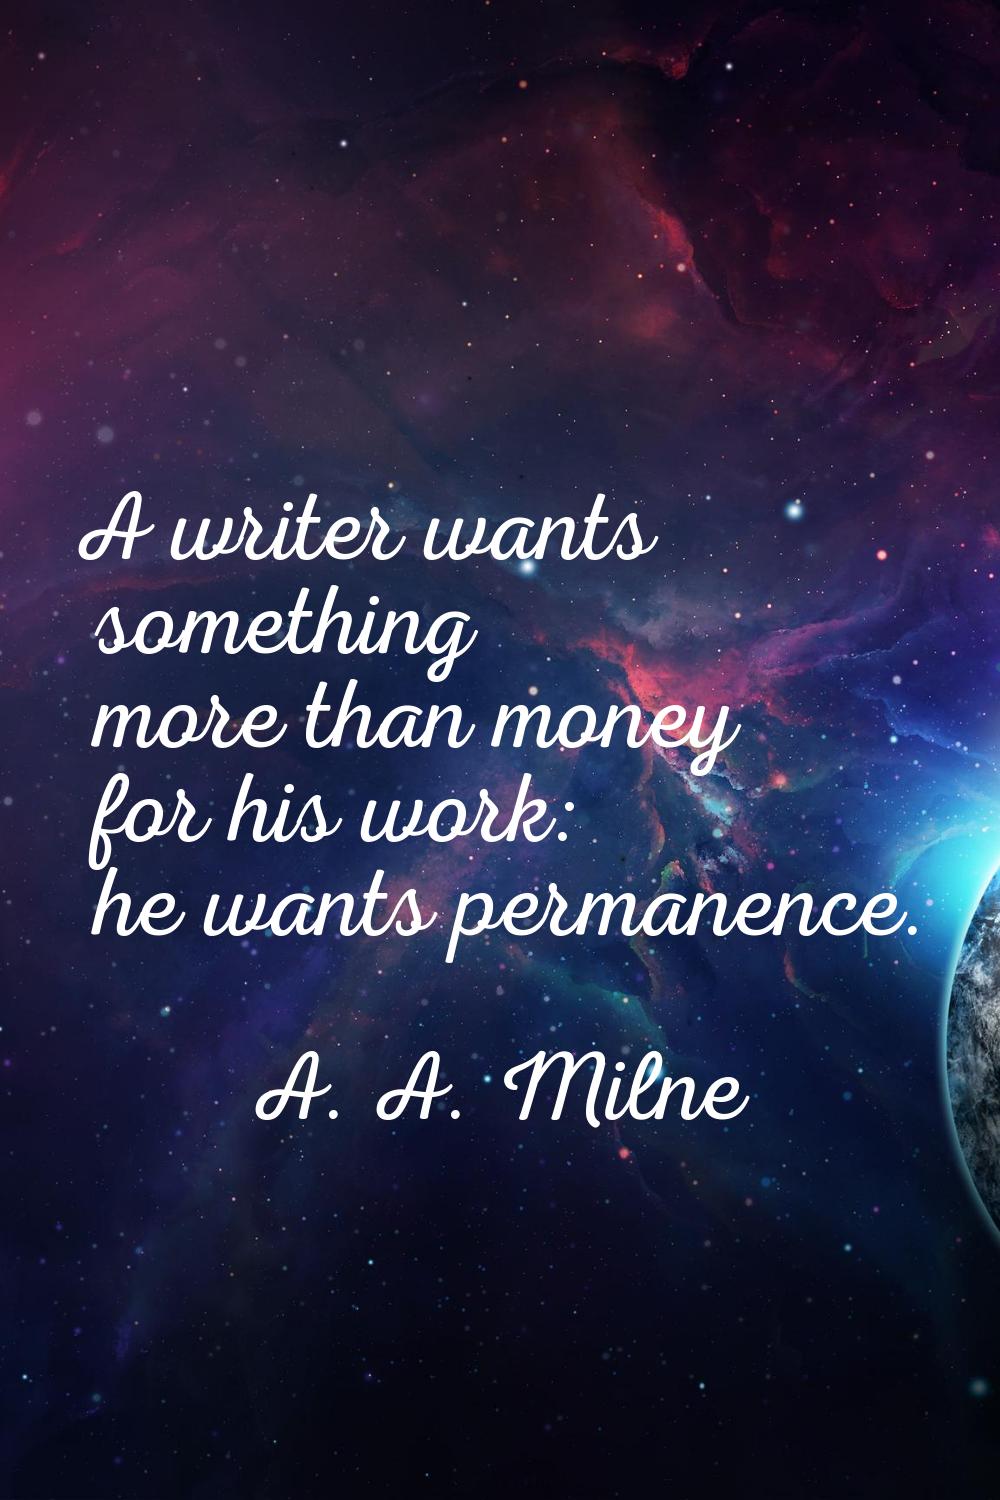 A writer wants something more than money for his work: he wants permanence.